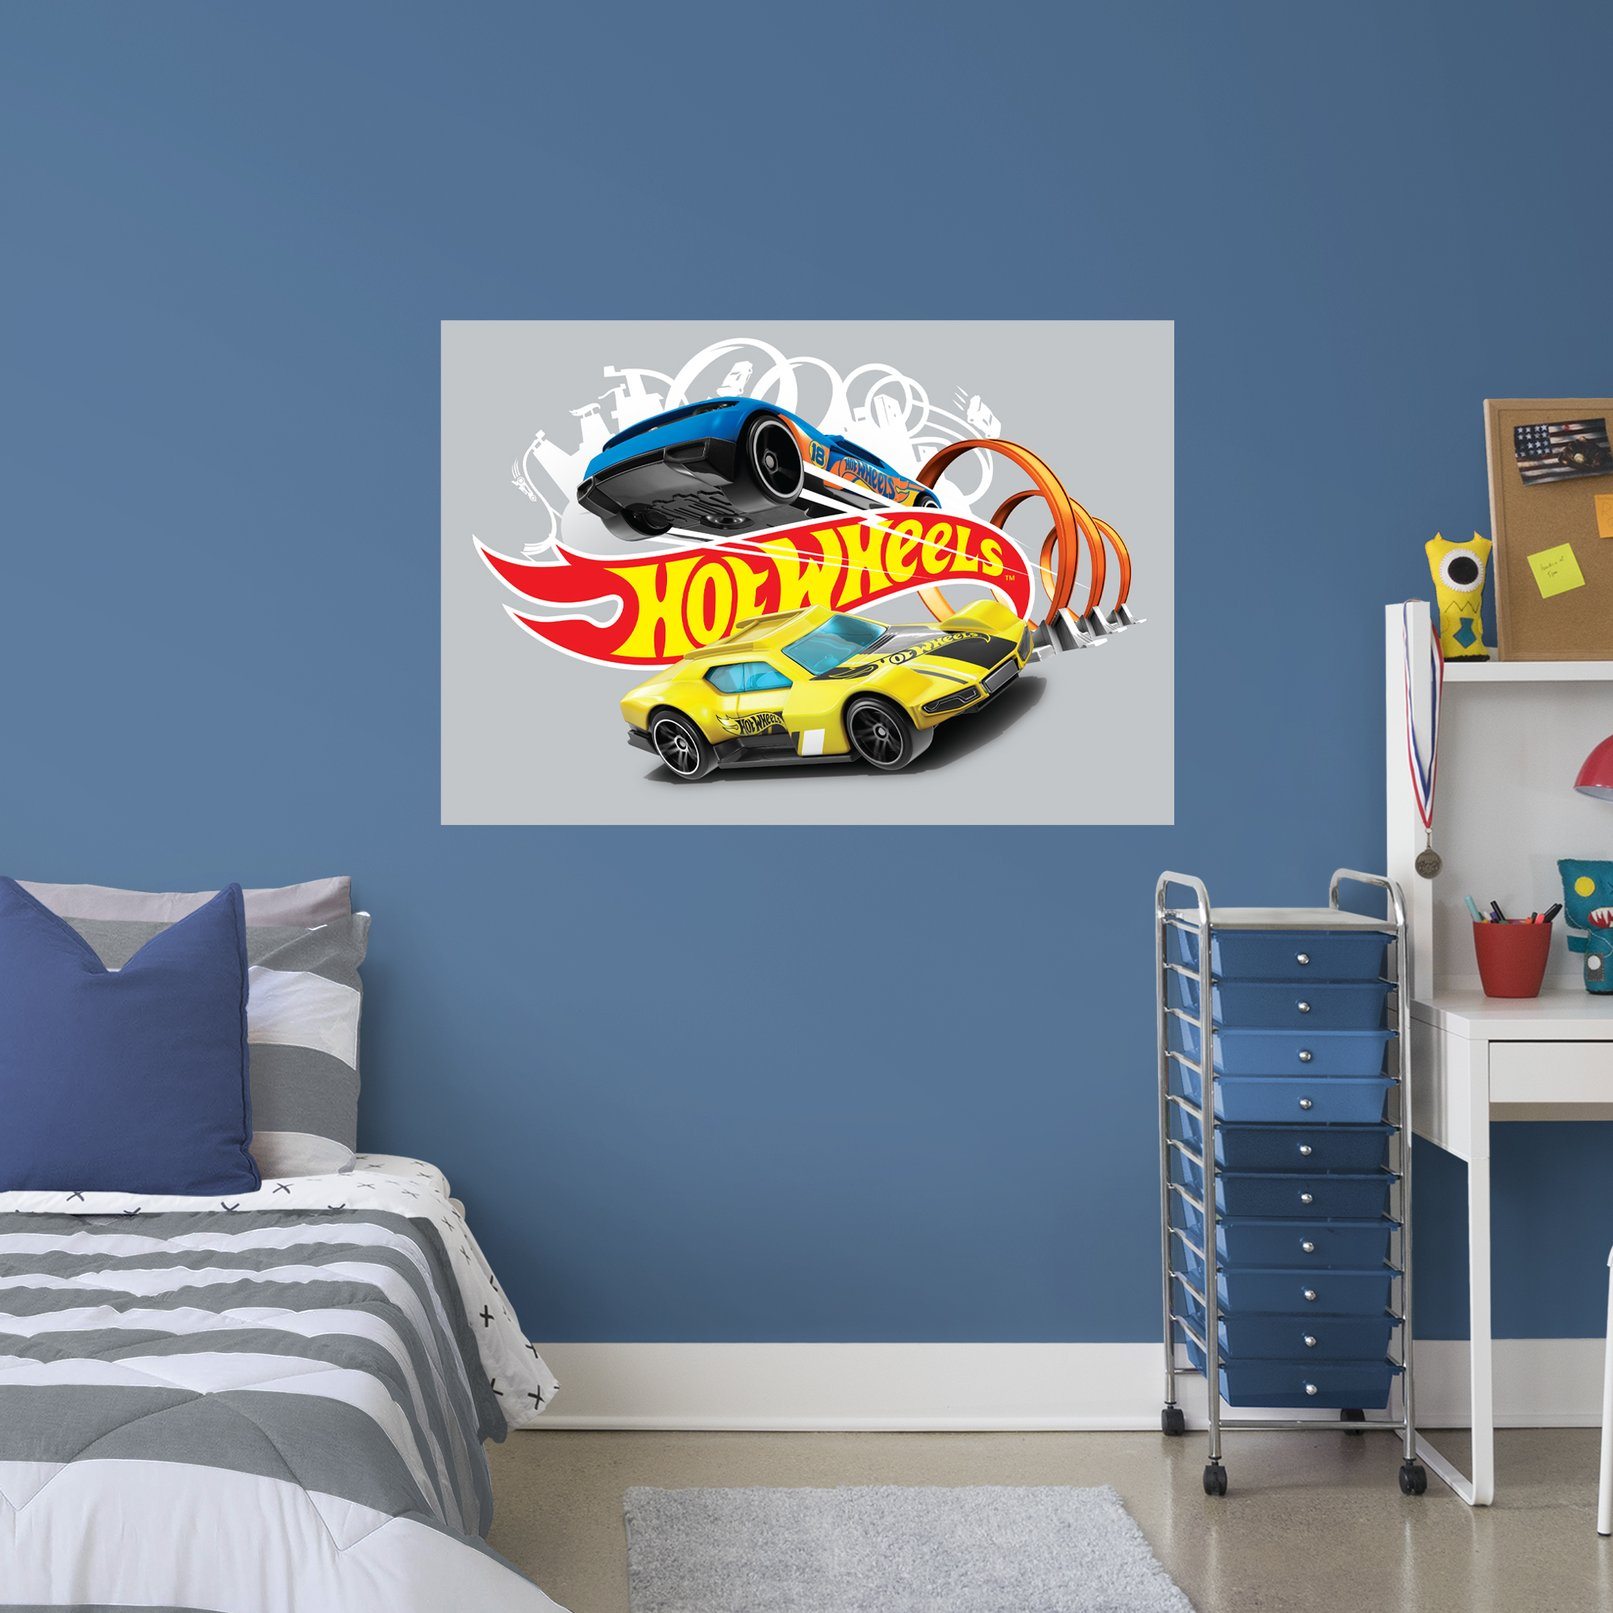 https://fathead.com/collections/flash-sale/products/1950-00216-003?variant=33573606293592